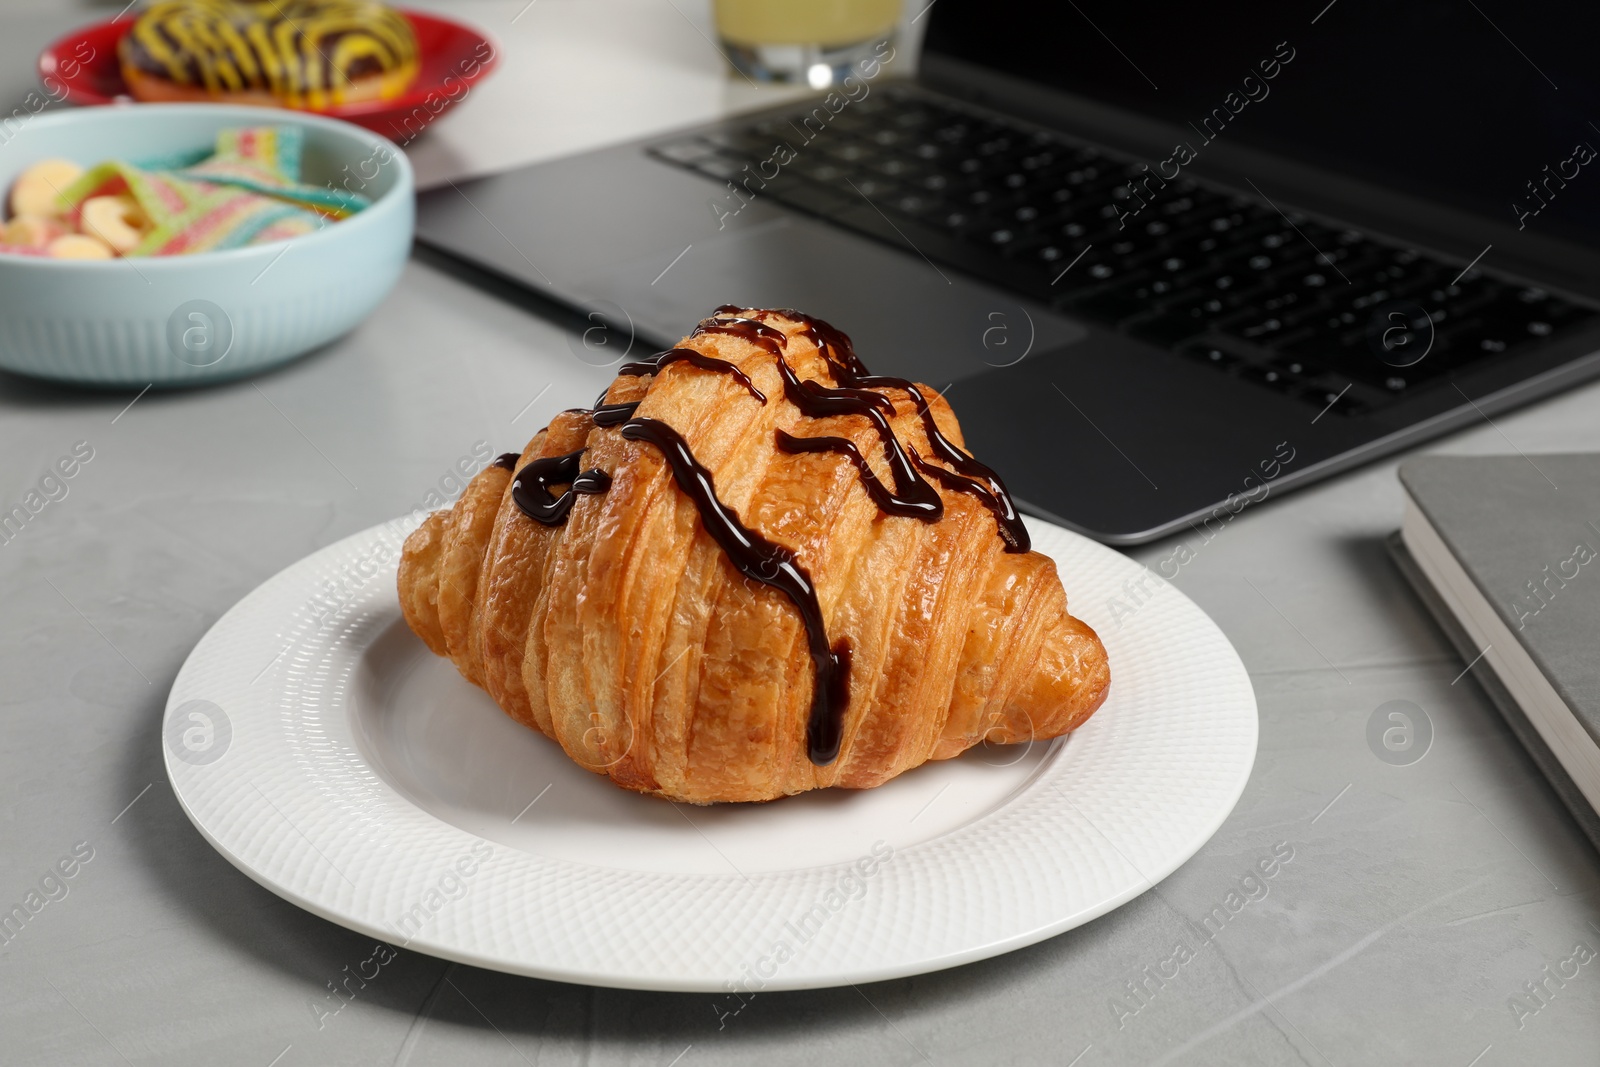 Photo of Bad eating habits at workplace. Delicious croissant and laptop on grey table, closeup